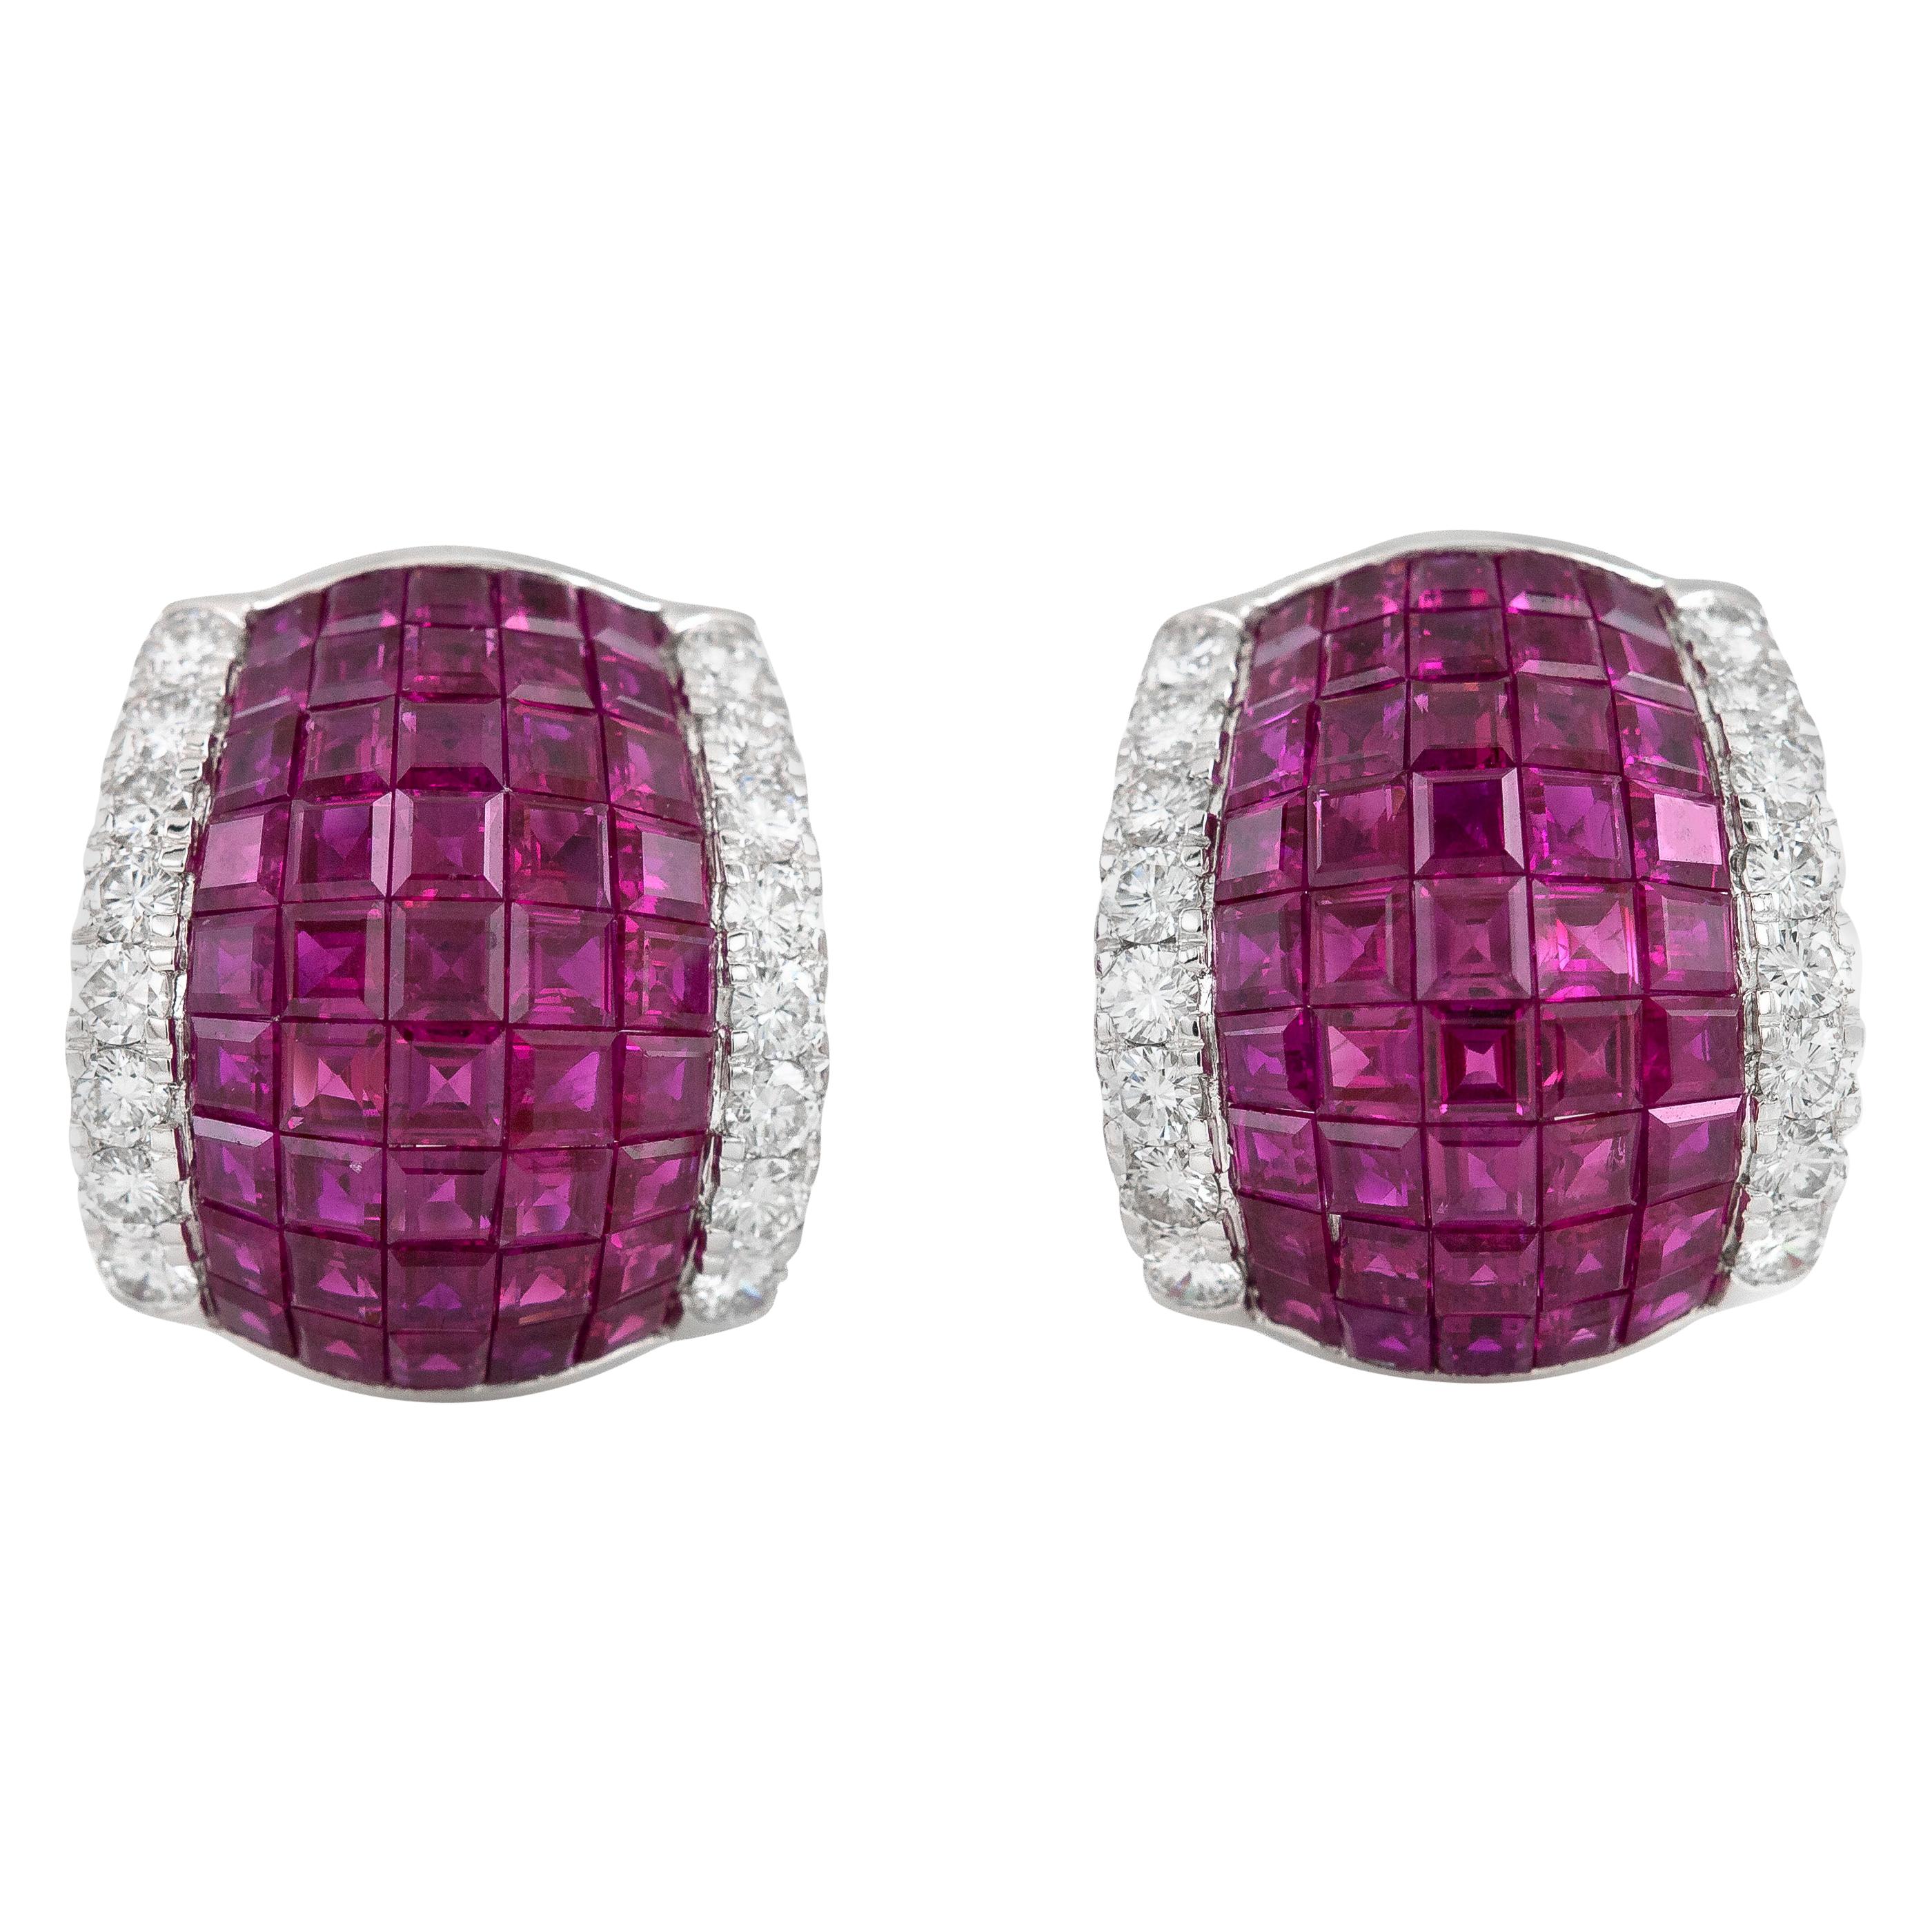 Oscar Heyman Invisible Setting Ruby Earrings with Diamonds For Sale